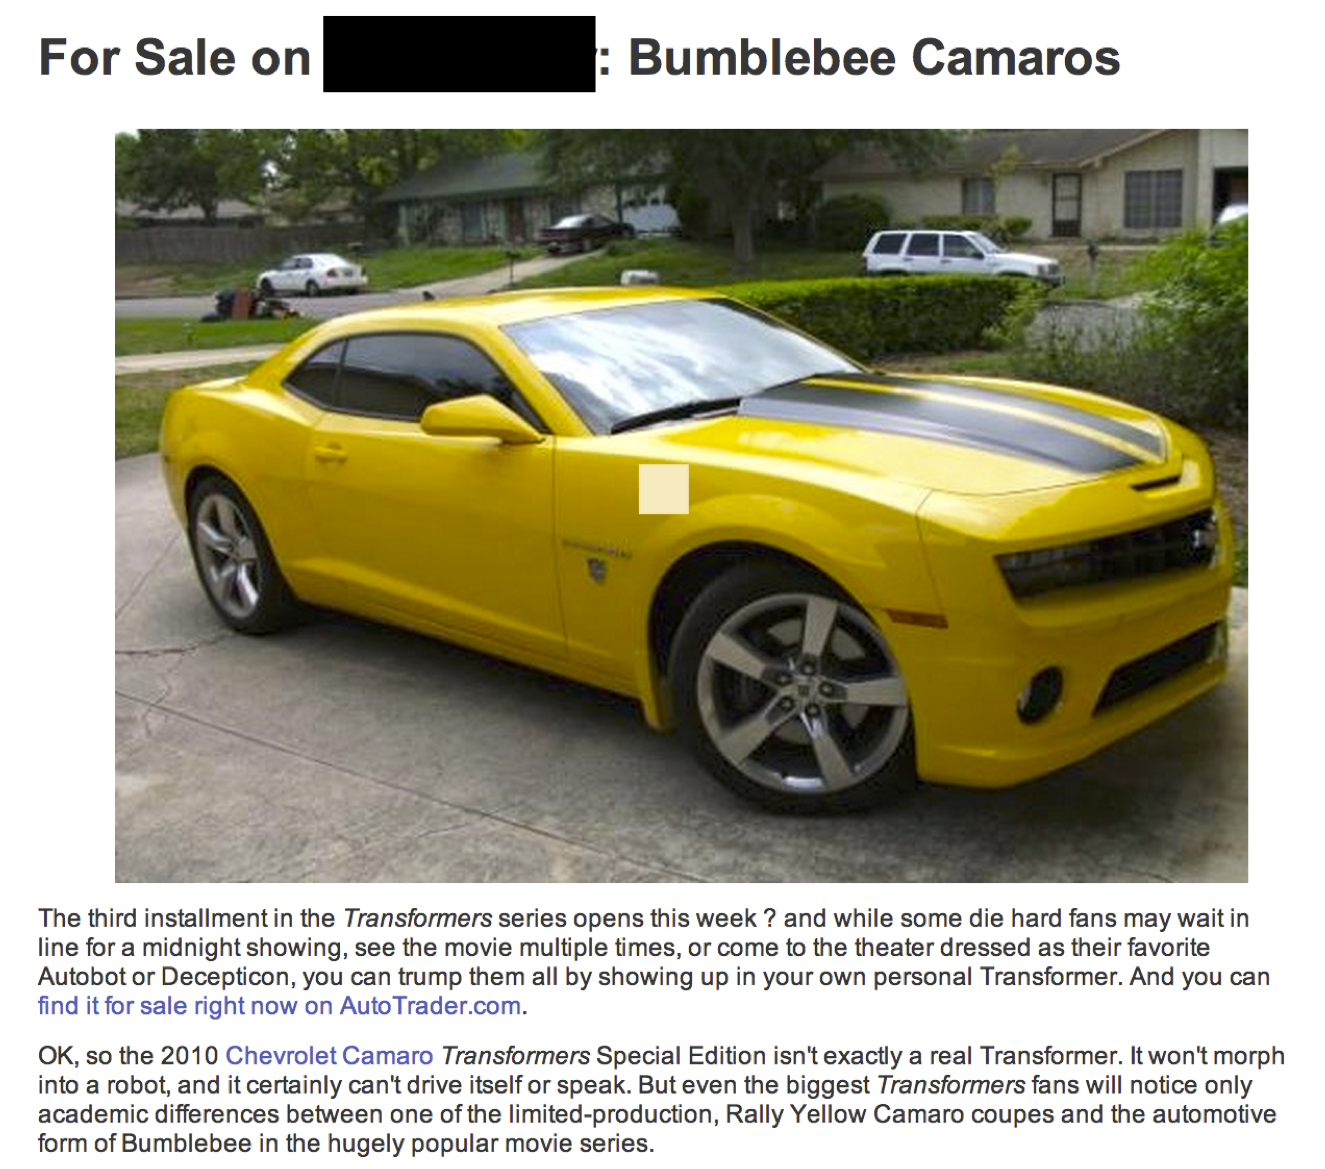 Image of Bumblebee Camaro car from auto website